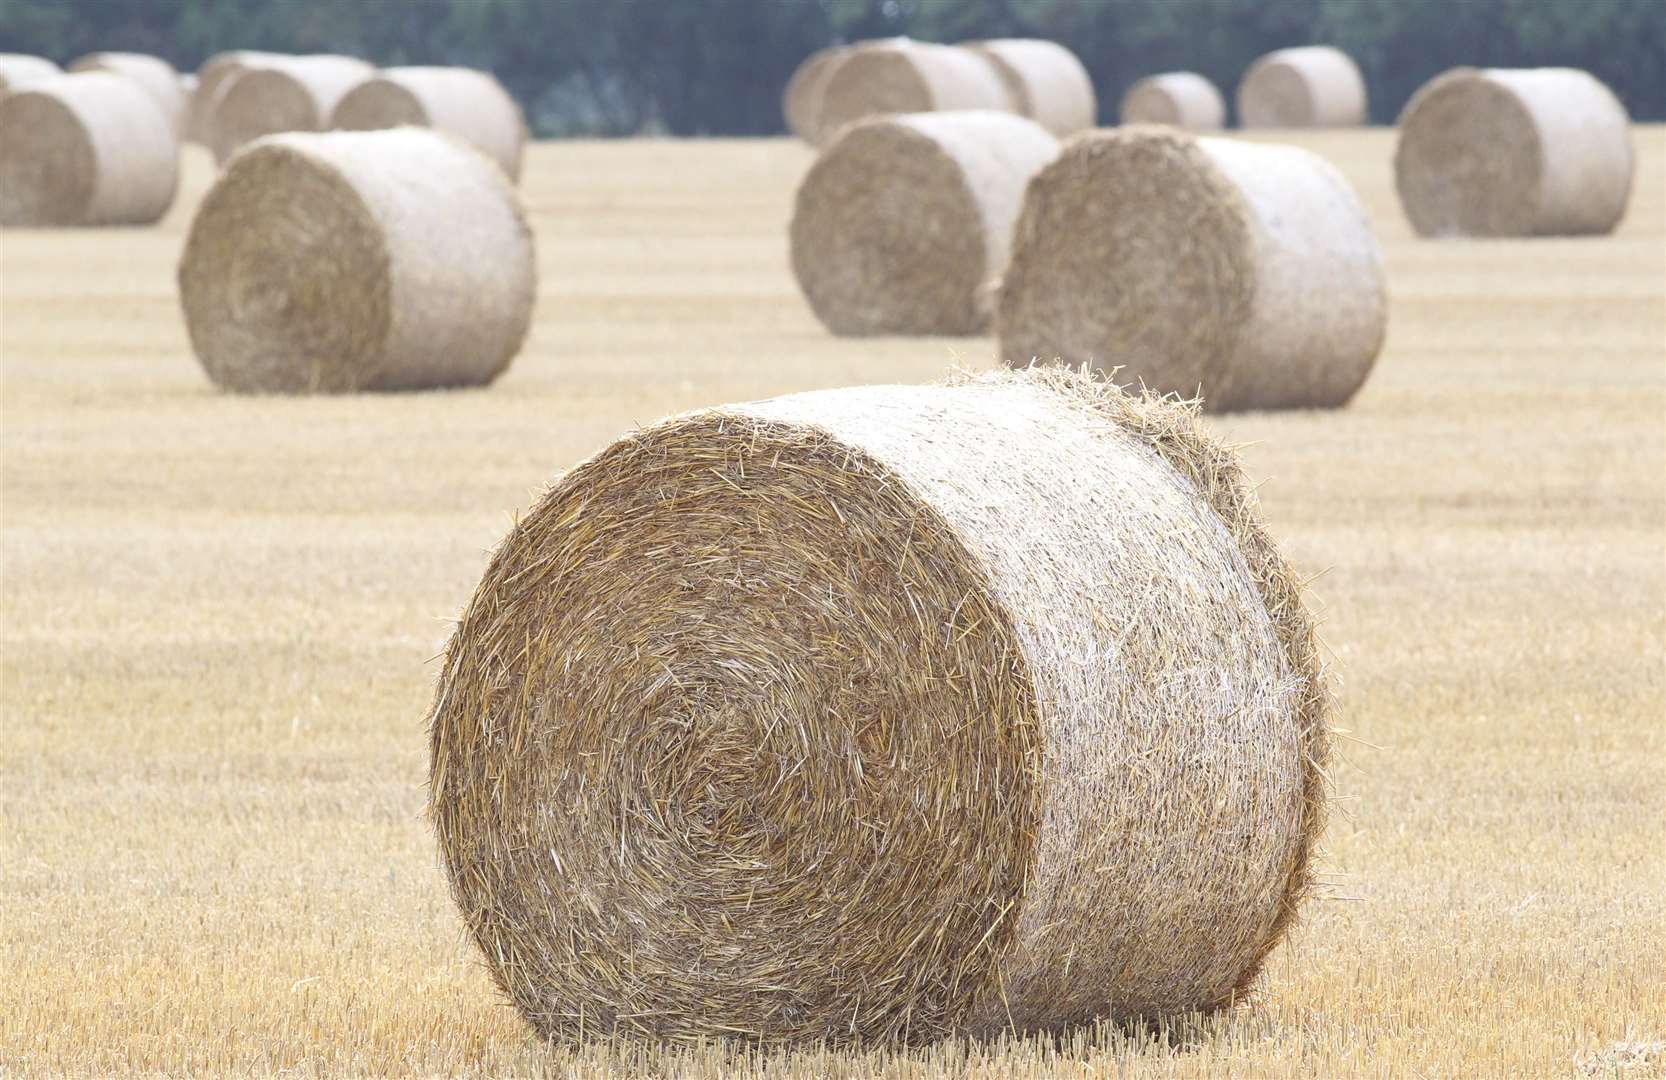 About 40 bales of hay were destroyed. Stock image